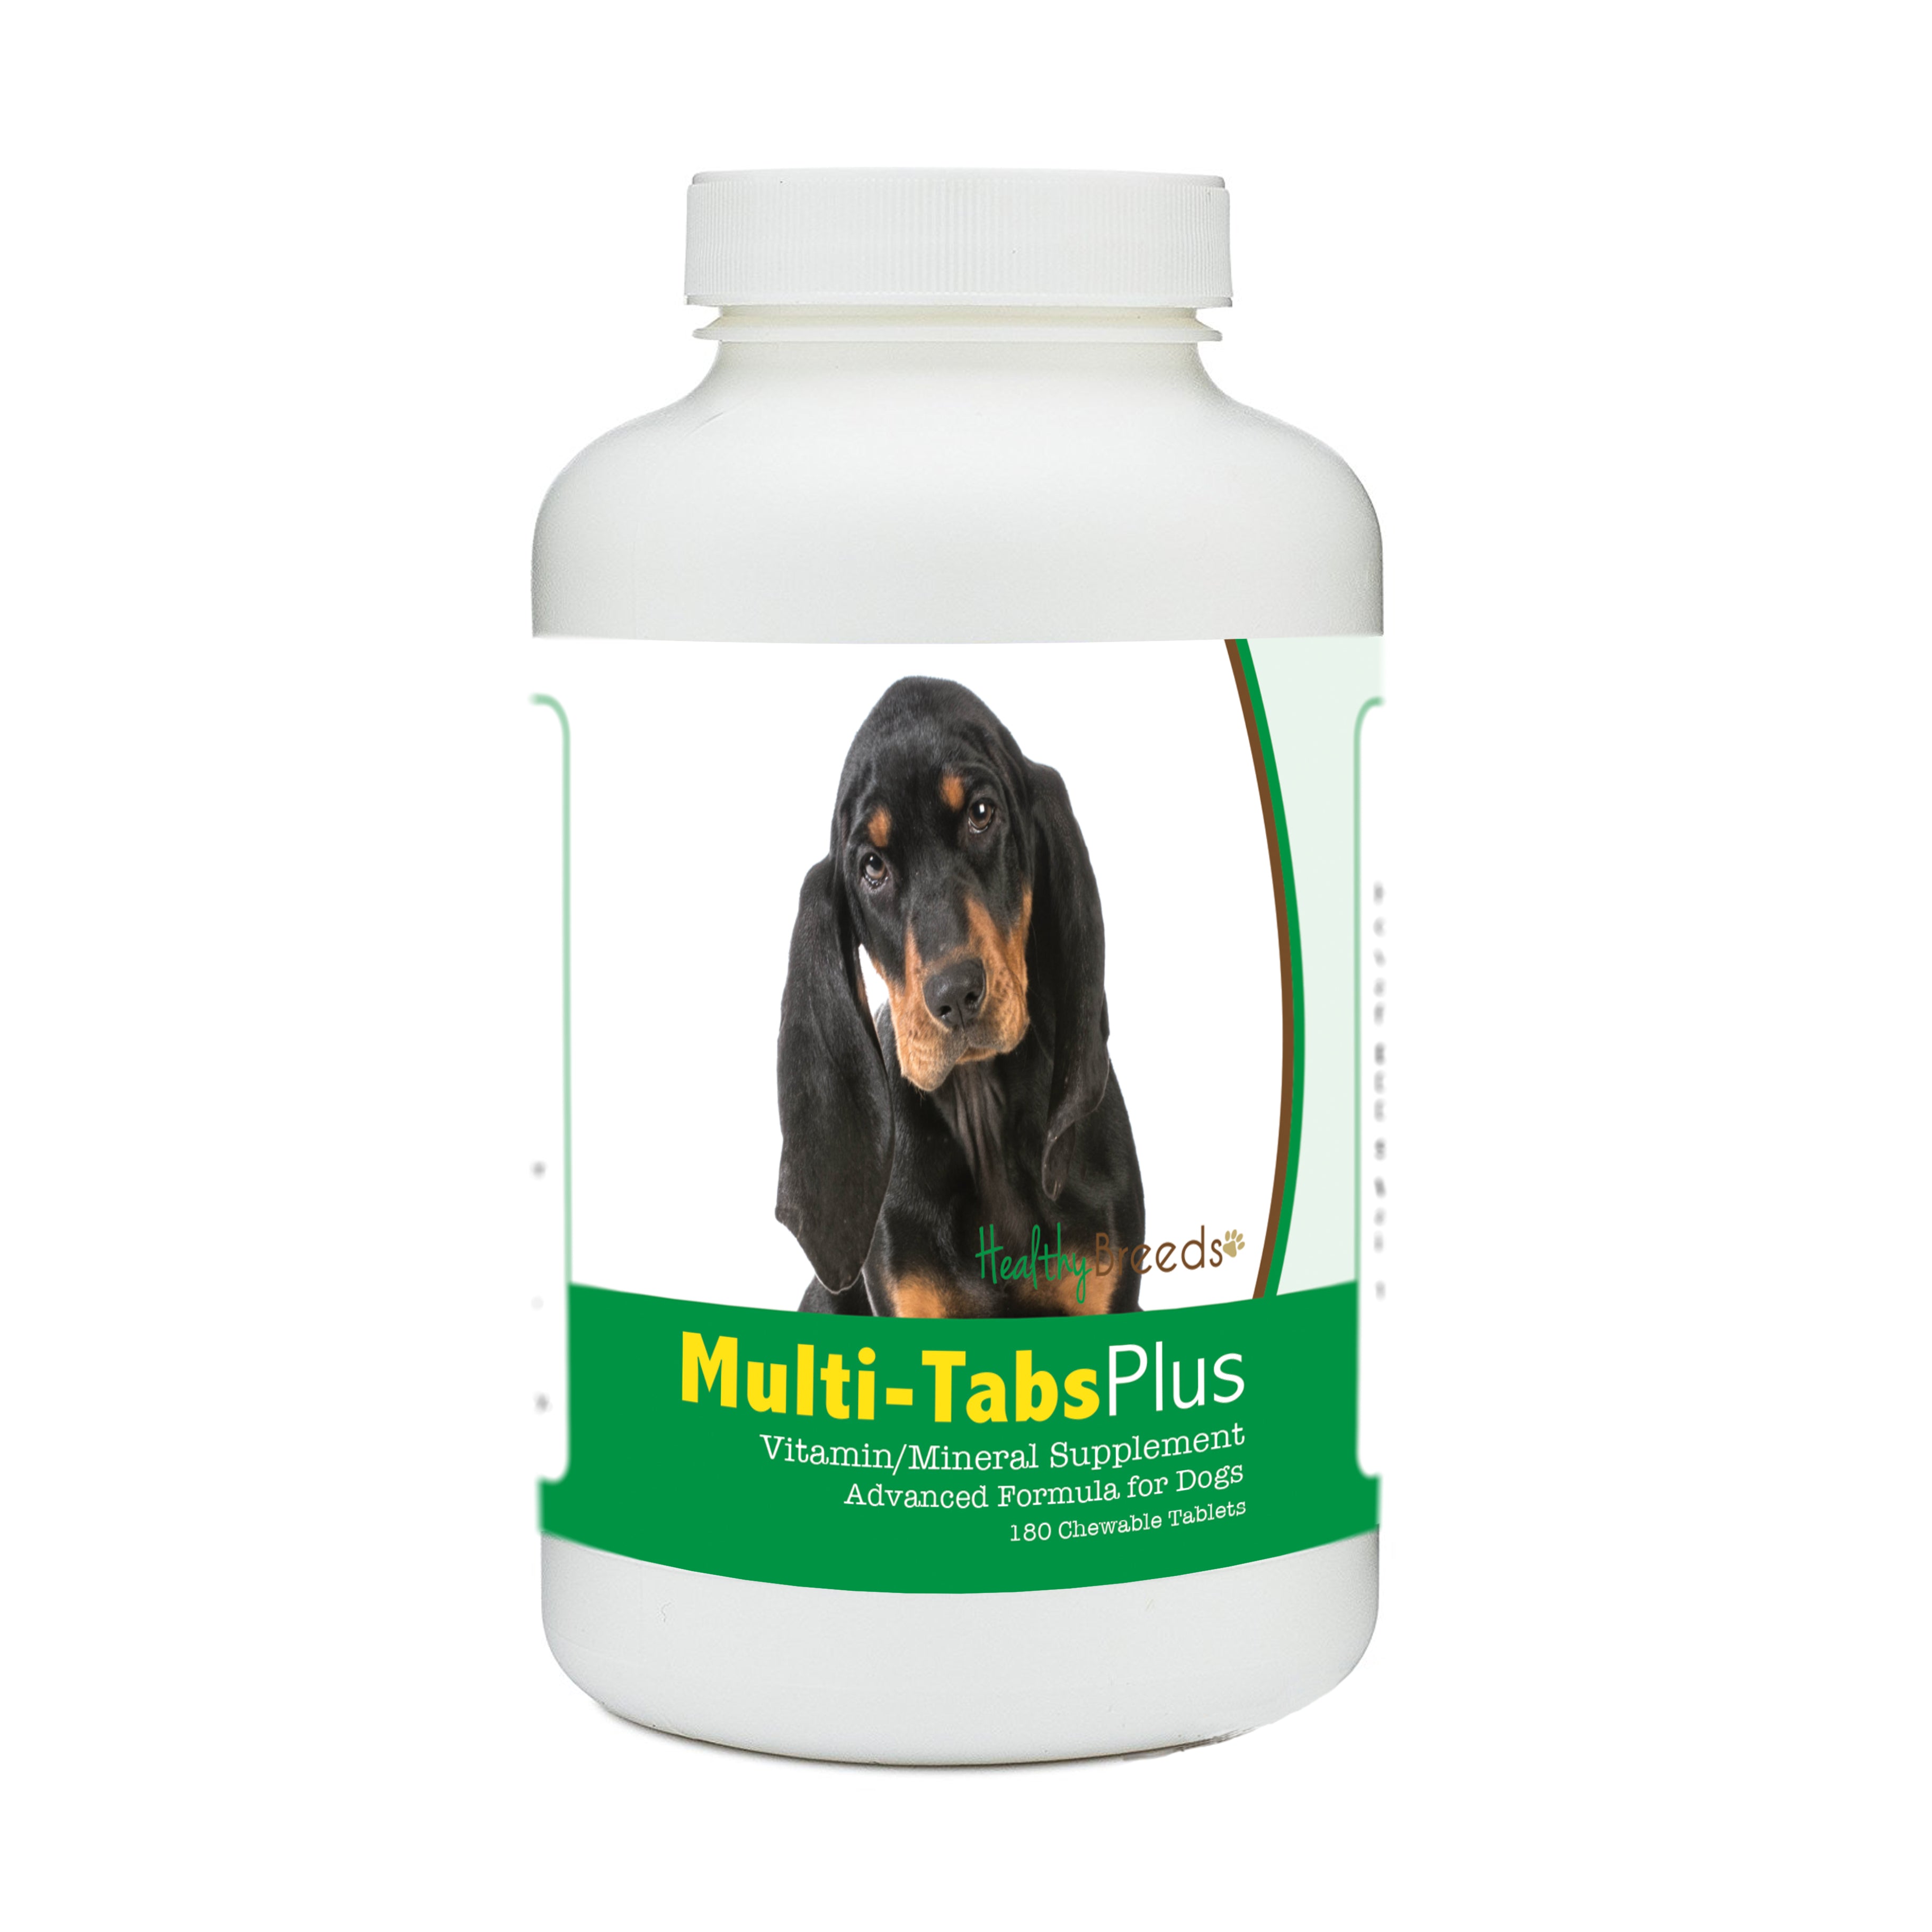 Black and Tan Coonhound Multi-Tabs Plus Chewable Tablets 180 Count